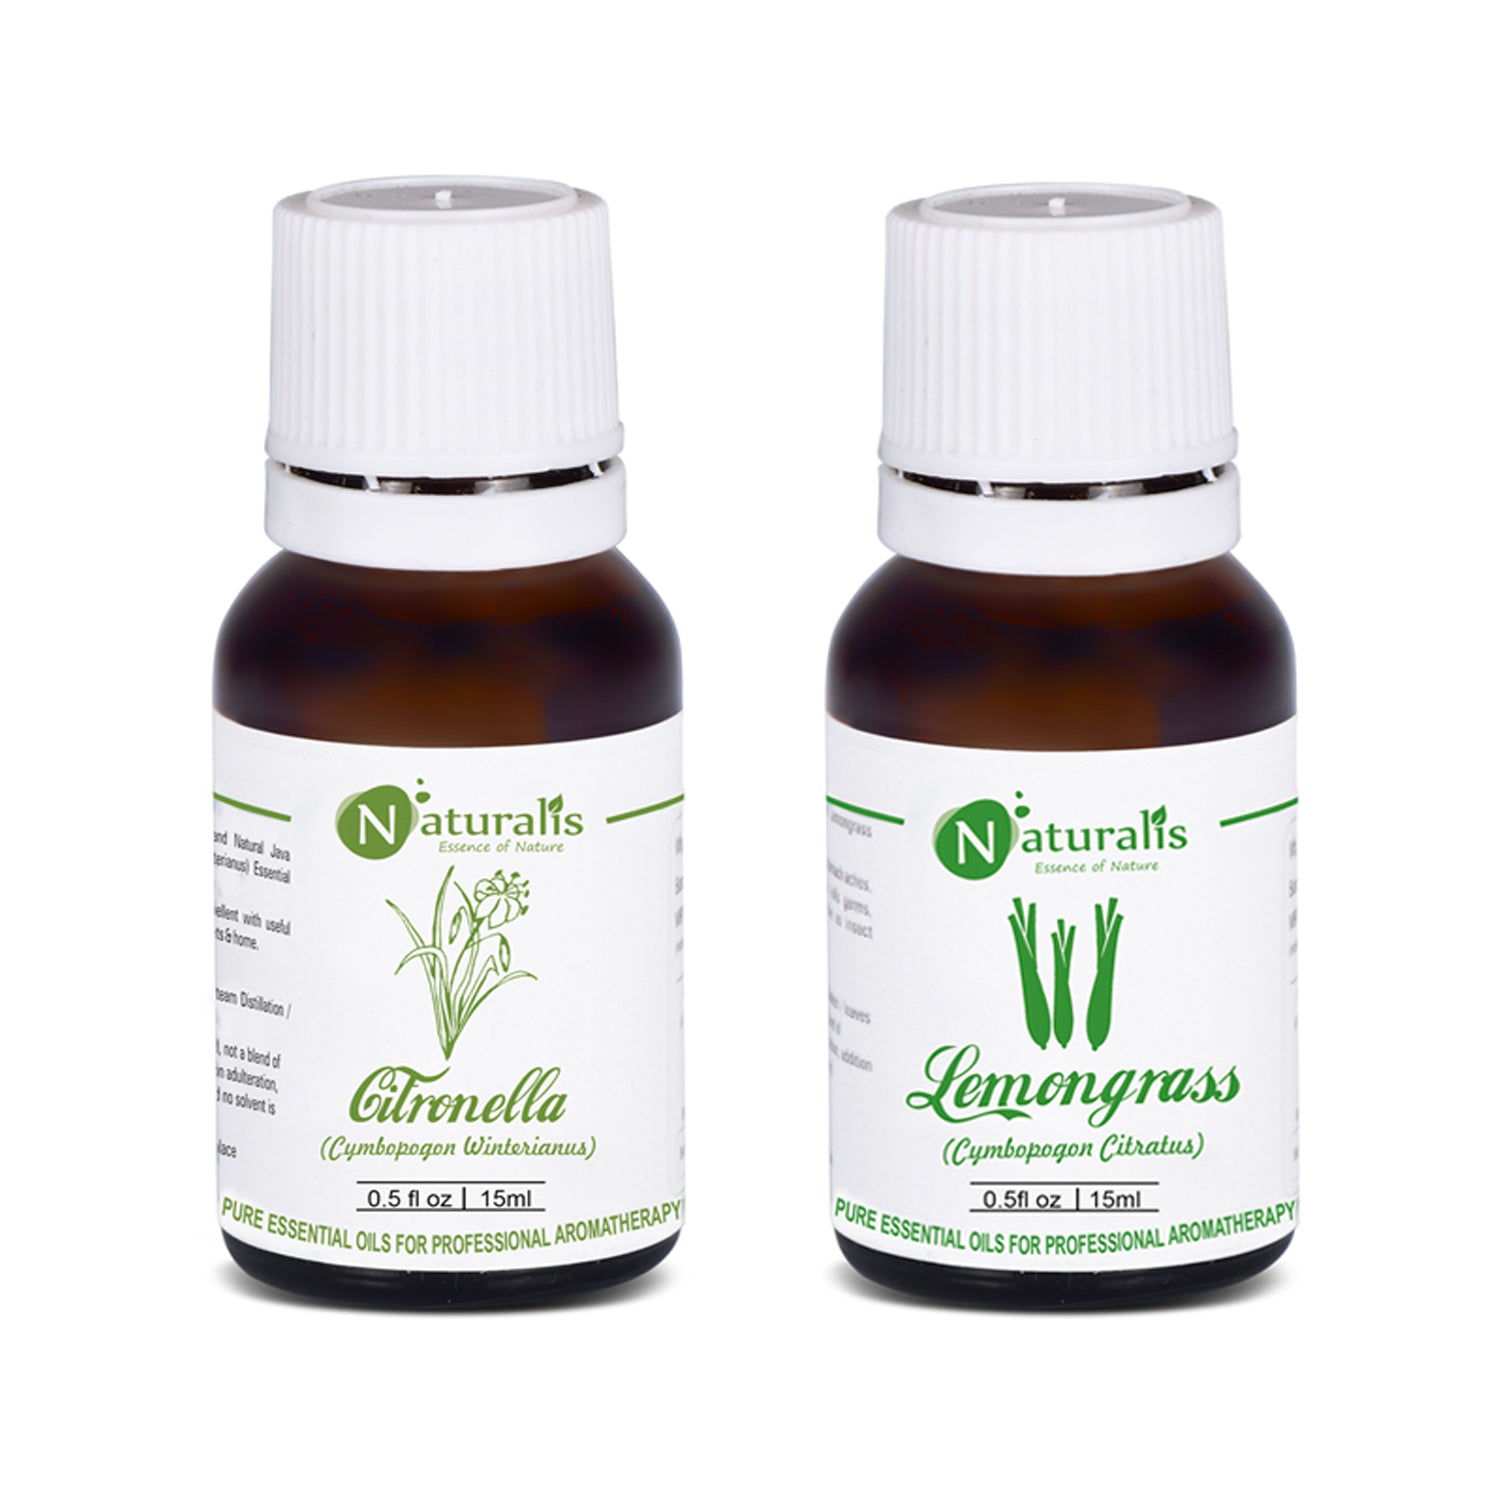 Citronella & Lemongrass Essential Oil for Insect/Mosquito Repellent Set of 2, 15ml by Naturalis - Pure & Natural - Naturalis